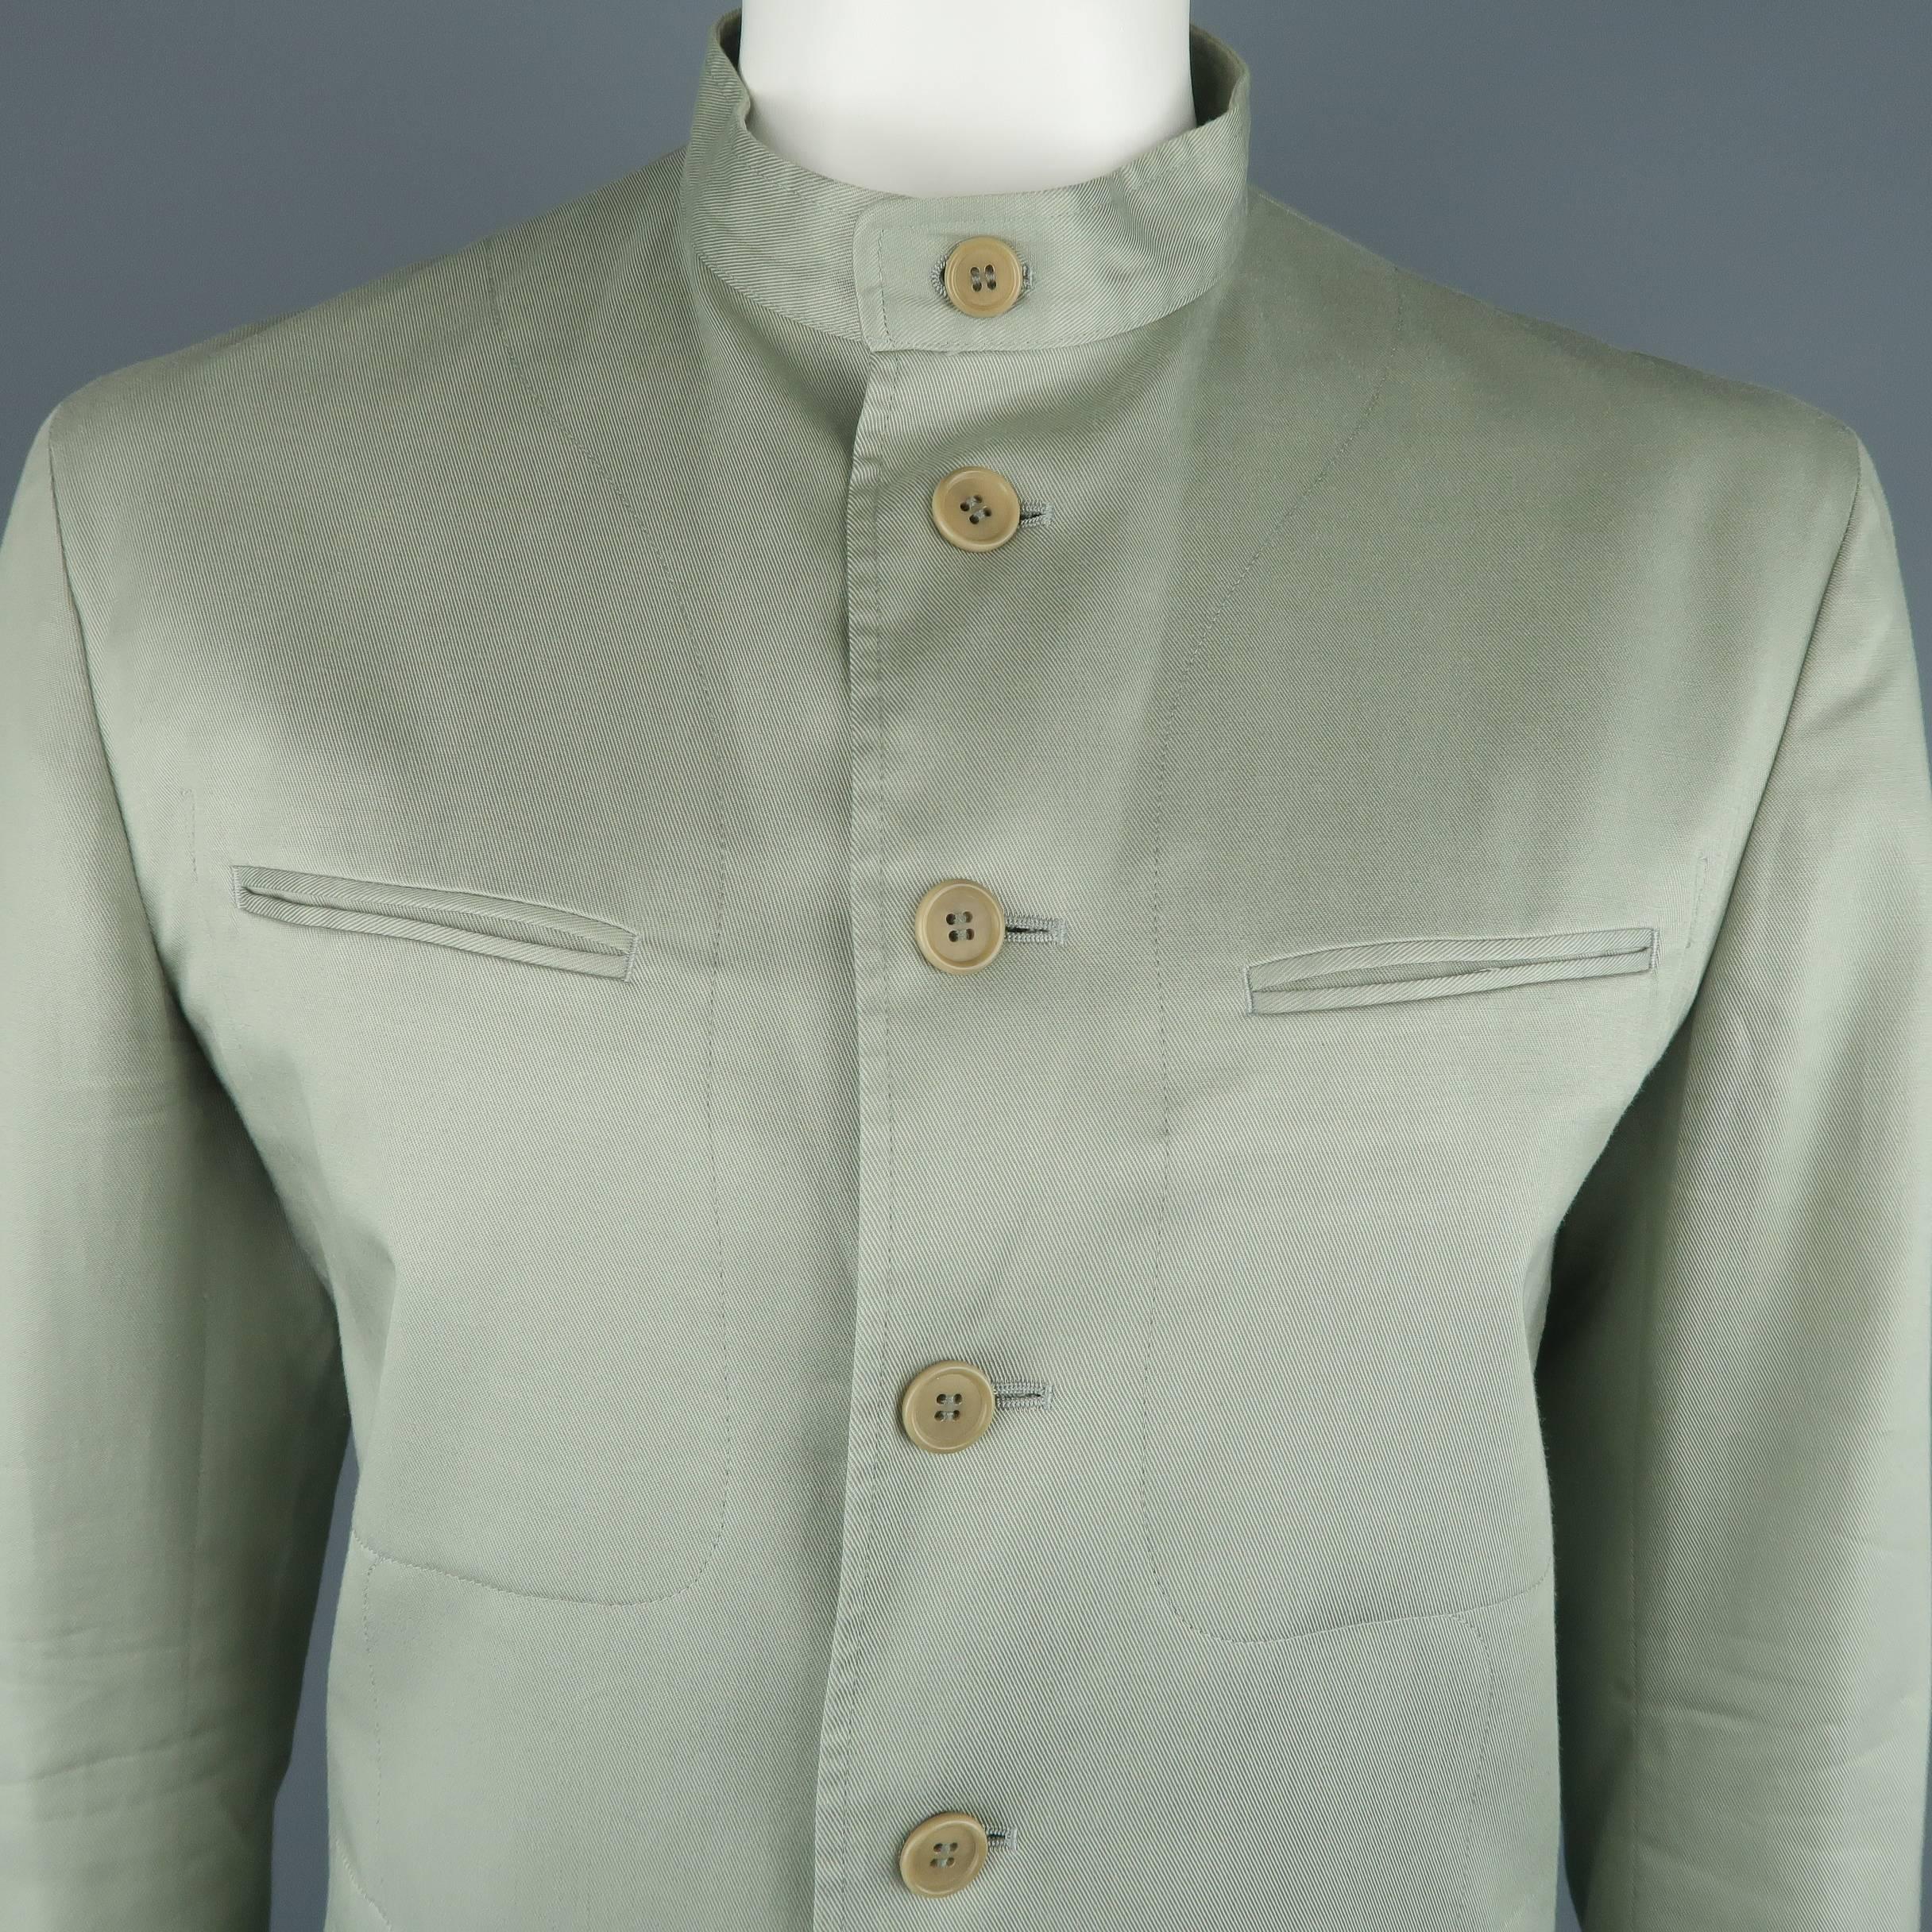 Archive ISSEY MIYAKE jacket comes in muted sage green cotton twill with a Nehru band collar, six button front, and patch and flap pockets with seam details throughout. Made in Japan.
 
Excellent Pre-Owned Condition.
Marked: JP 3
 
Measurements:
